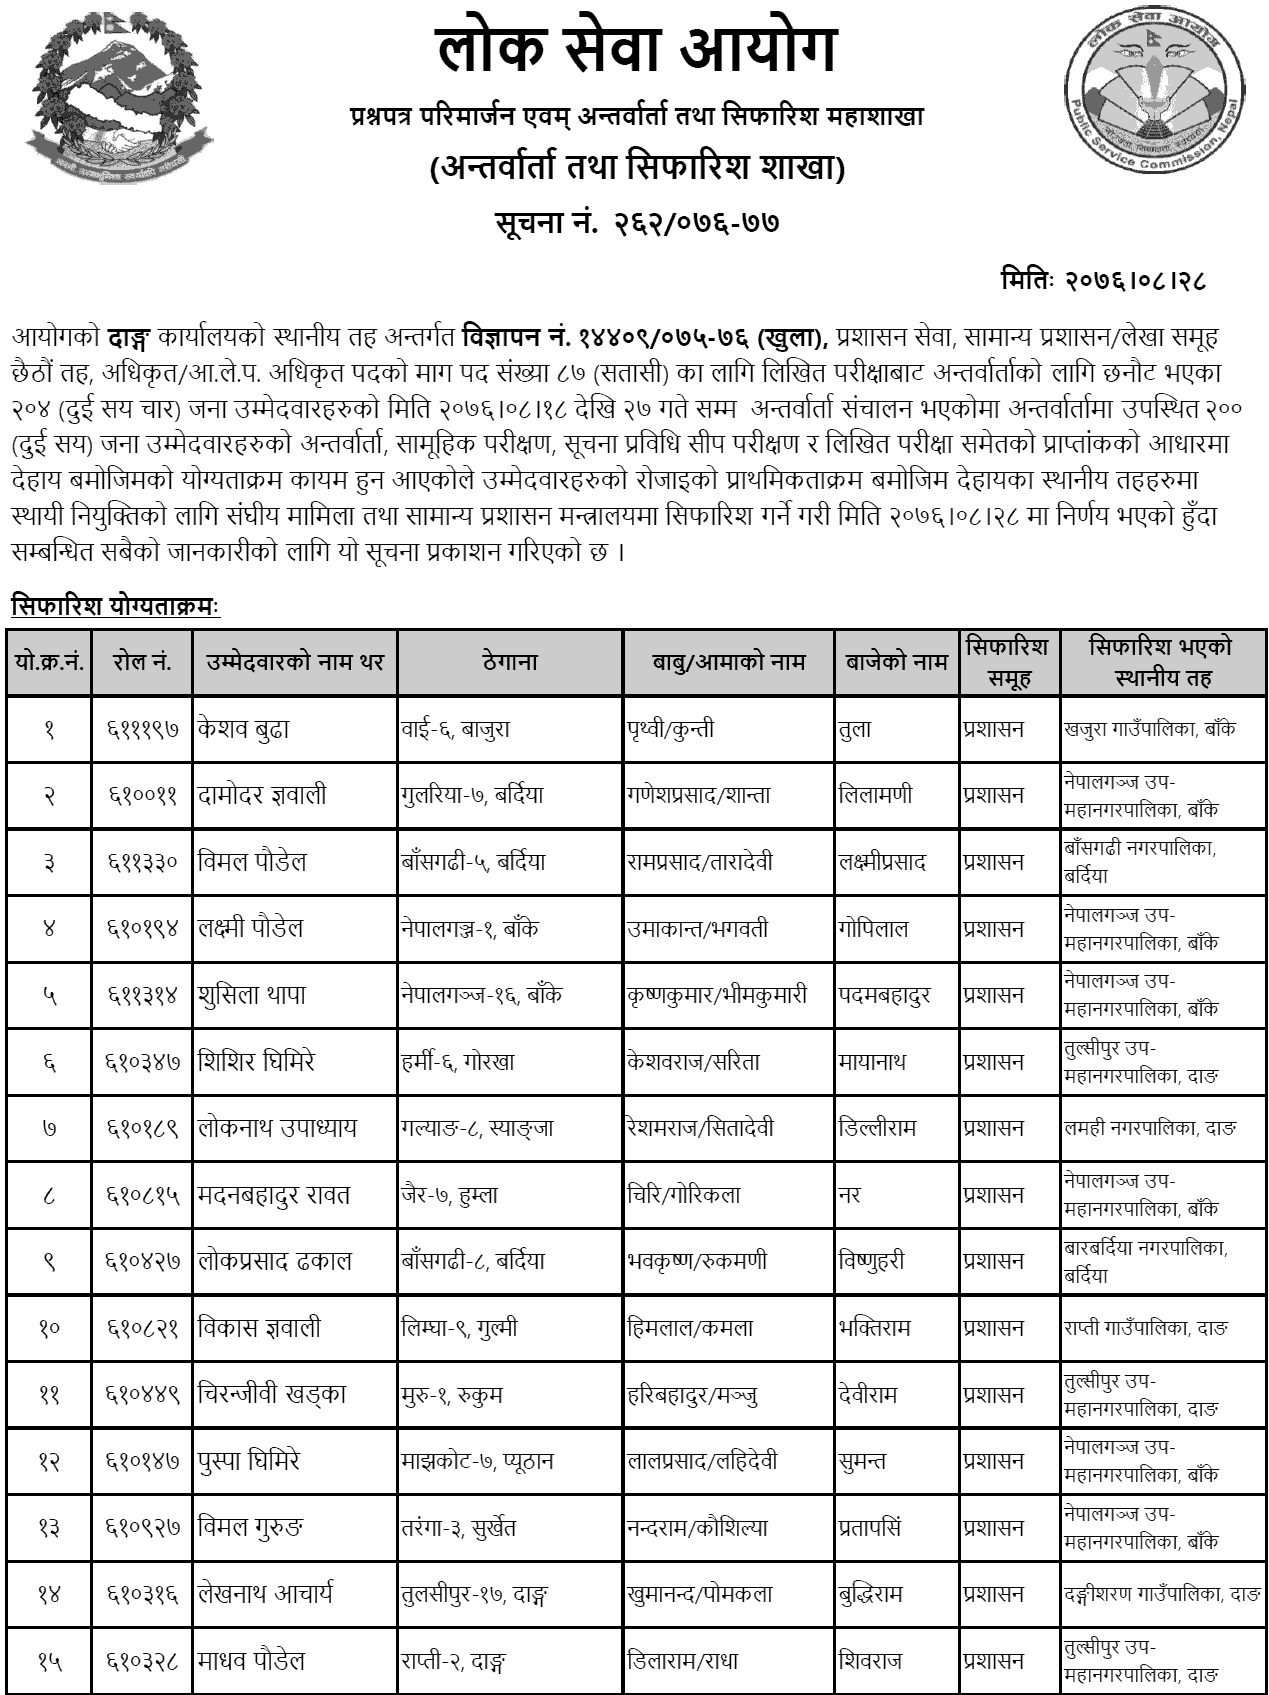 Lok Sewa Aayog Dang Local Level 6th Officer Final Result and Recommendations